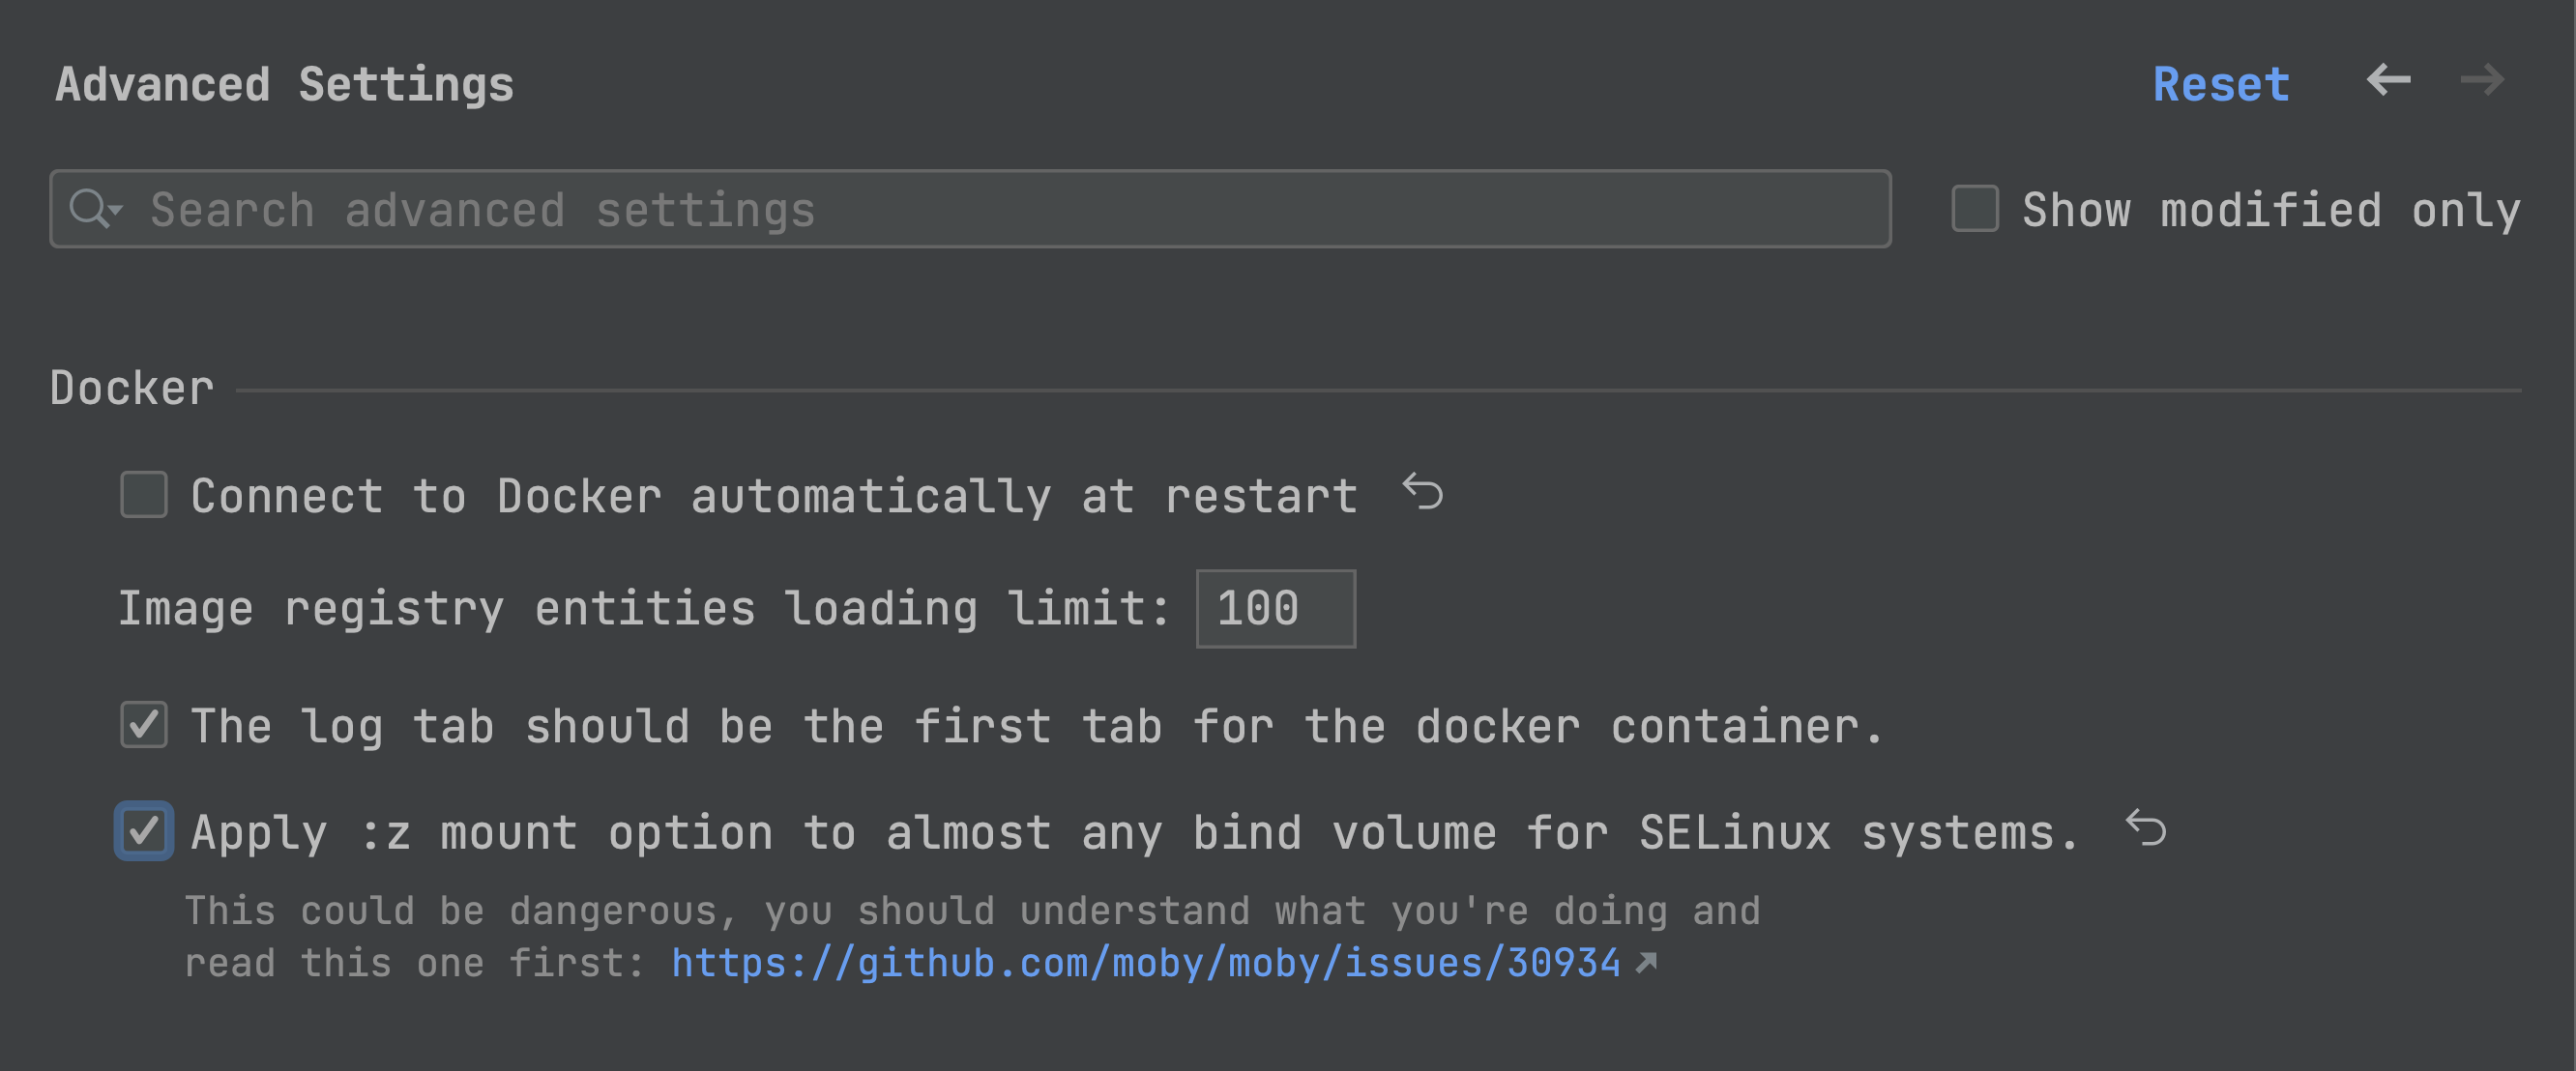 Settings for applying the :z mount option to bind volumes on SELinux are shown